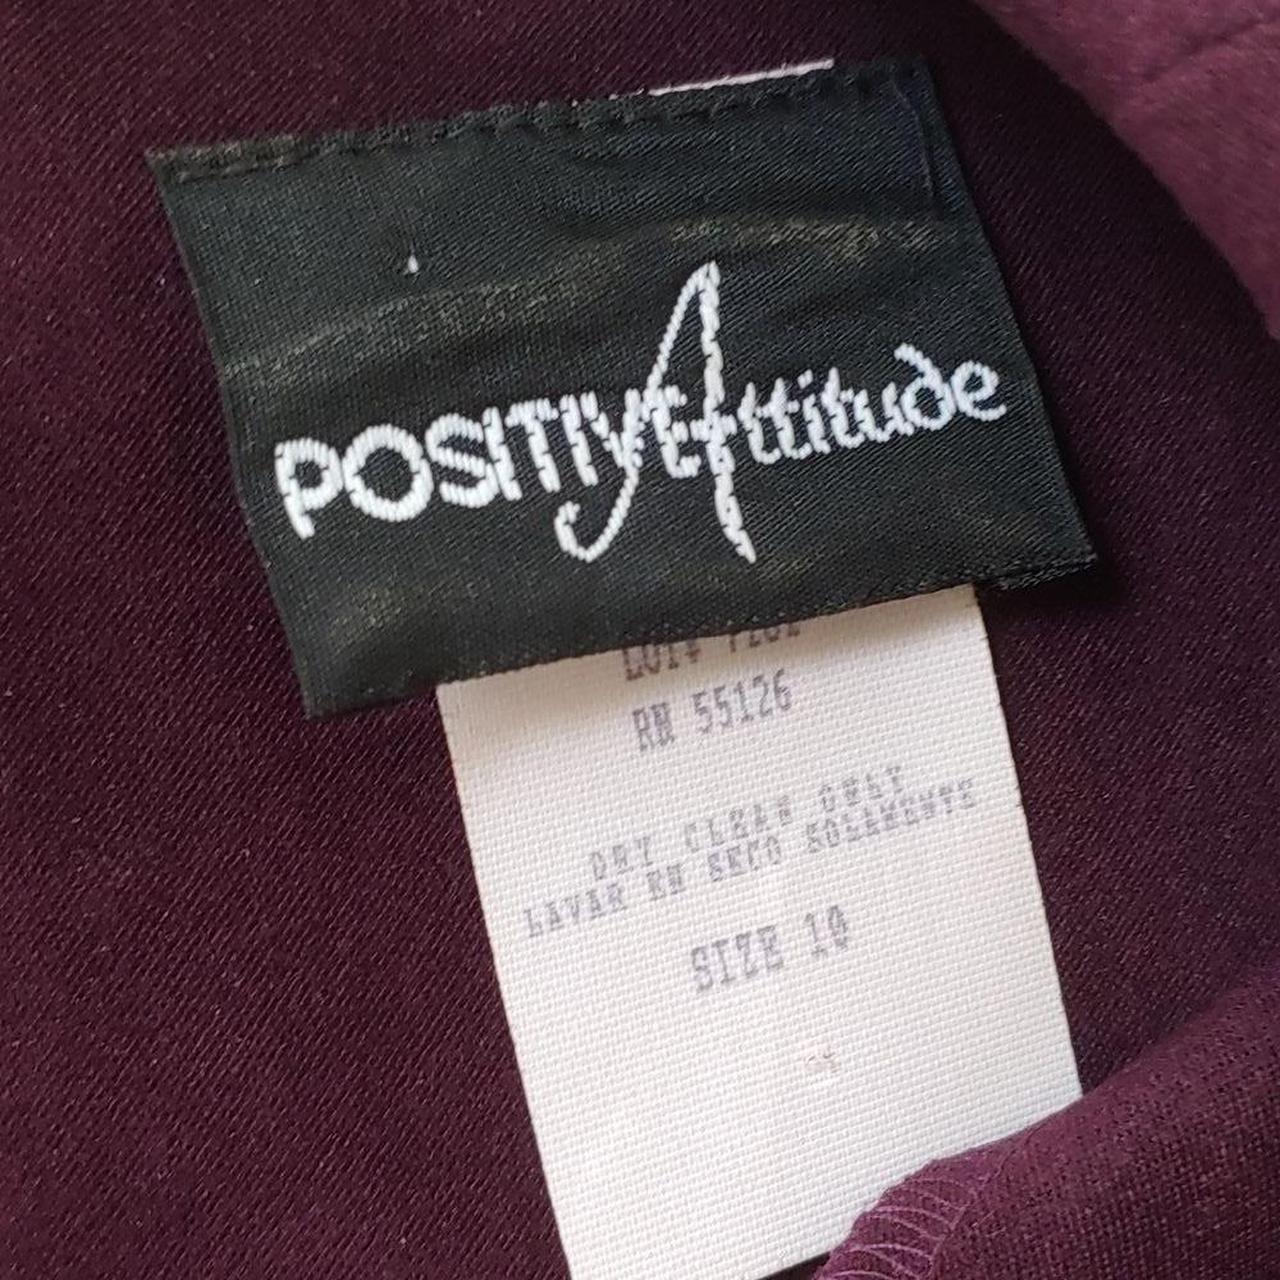 Product Image 4 - Vintage dress by Positive Attitude!

Warm-toned